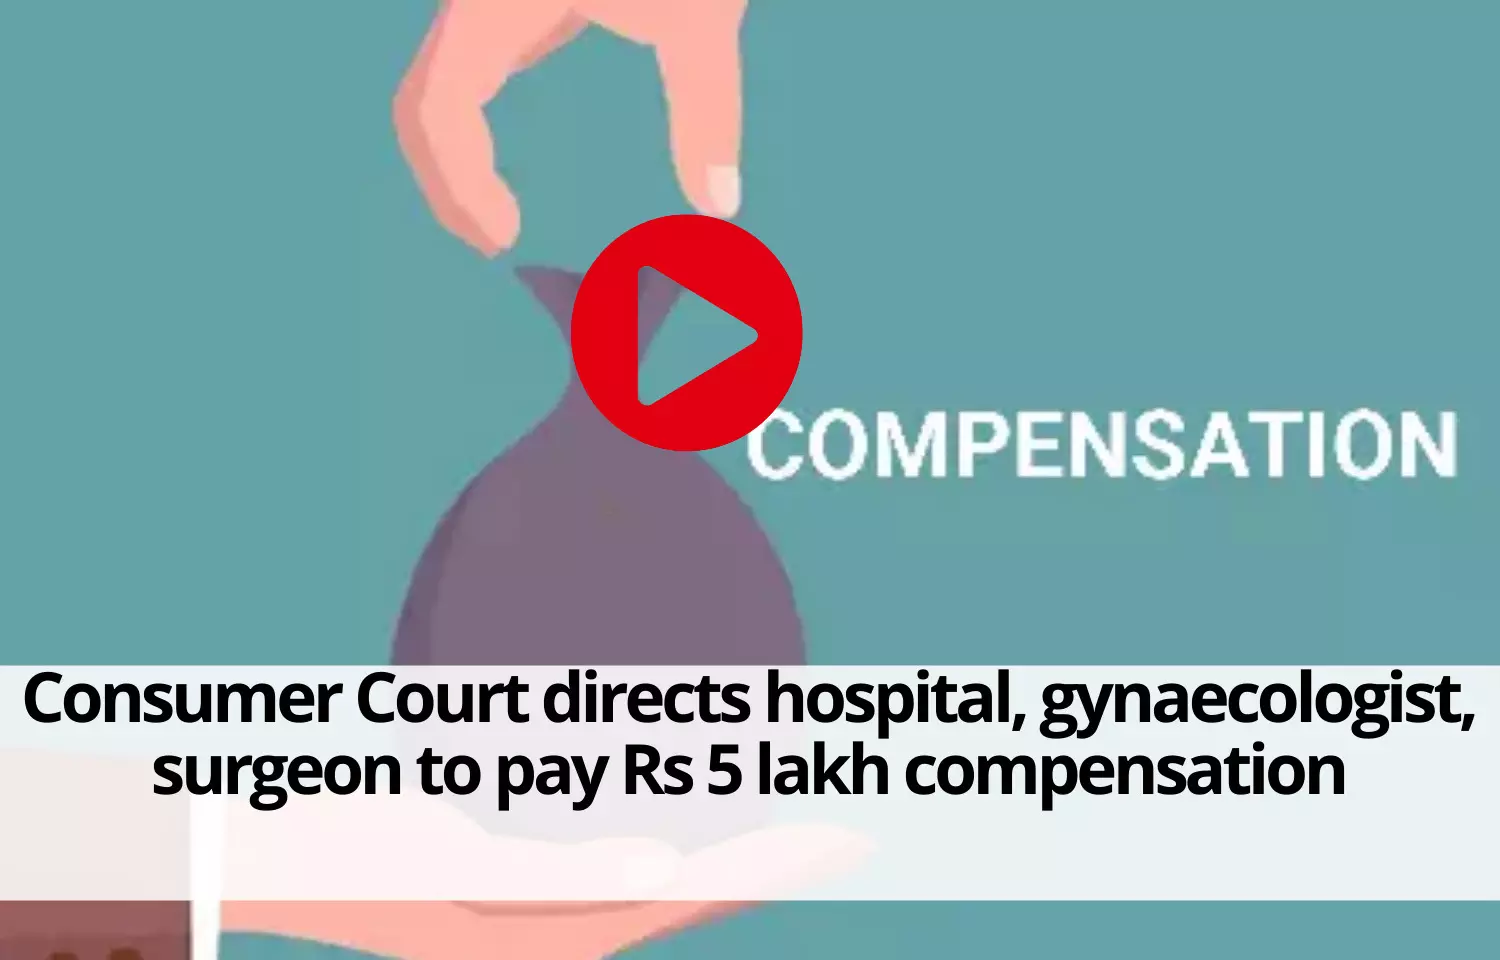 Consumer Court directs hospital, gynaecologist, surgeon to pay Rs 5 lakh compensation